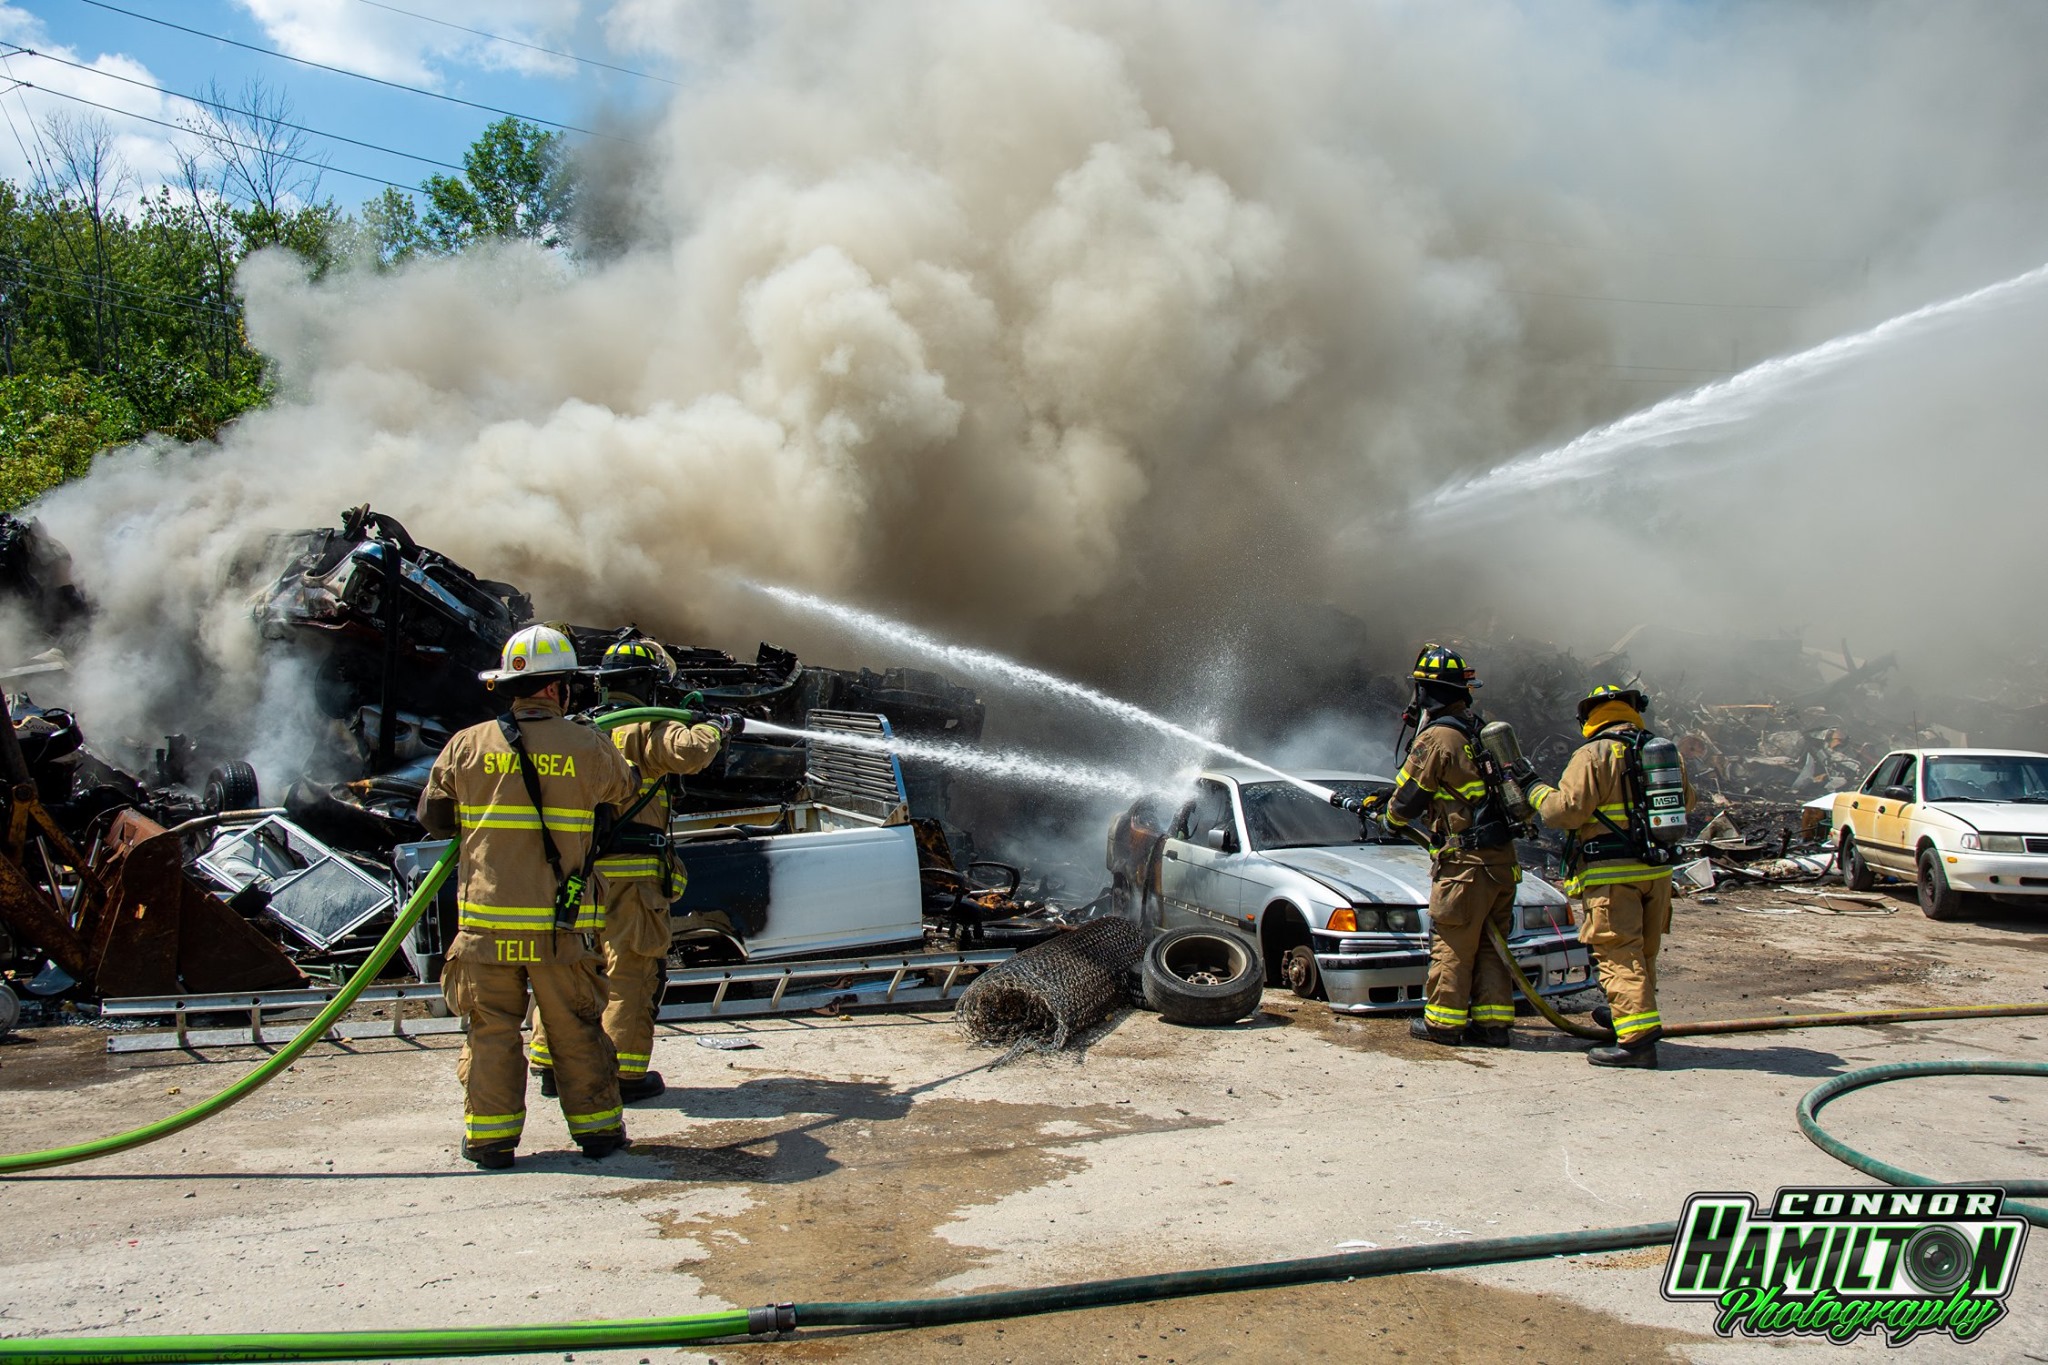  On 07/27/2019, East Side Fire responded for a fire in a junk yard with automatic mutual aid from Swansea Fire Department. Belleville Fire Department and Northwest Fire Department also responded mutual aid. 